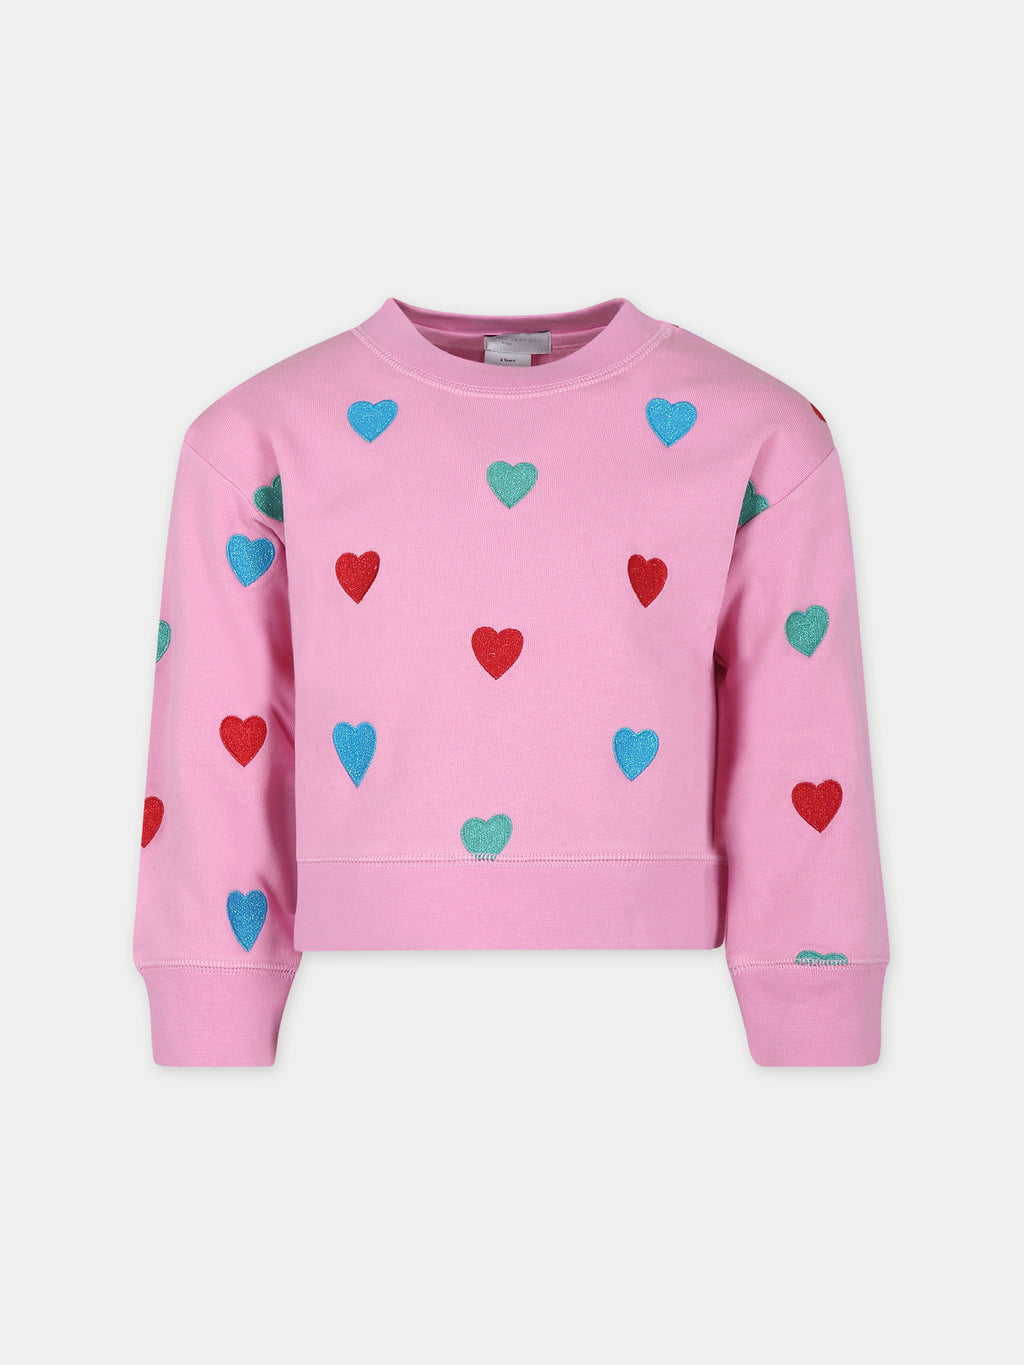 Pink sweatshirt for girl with hearts